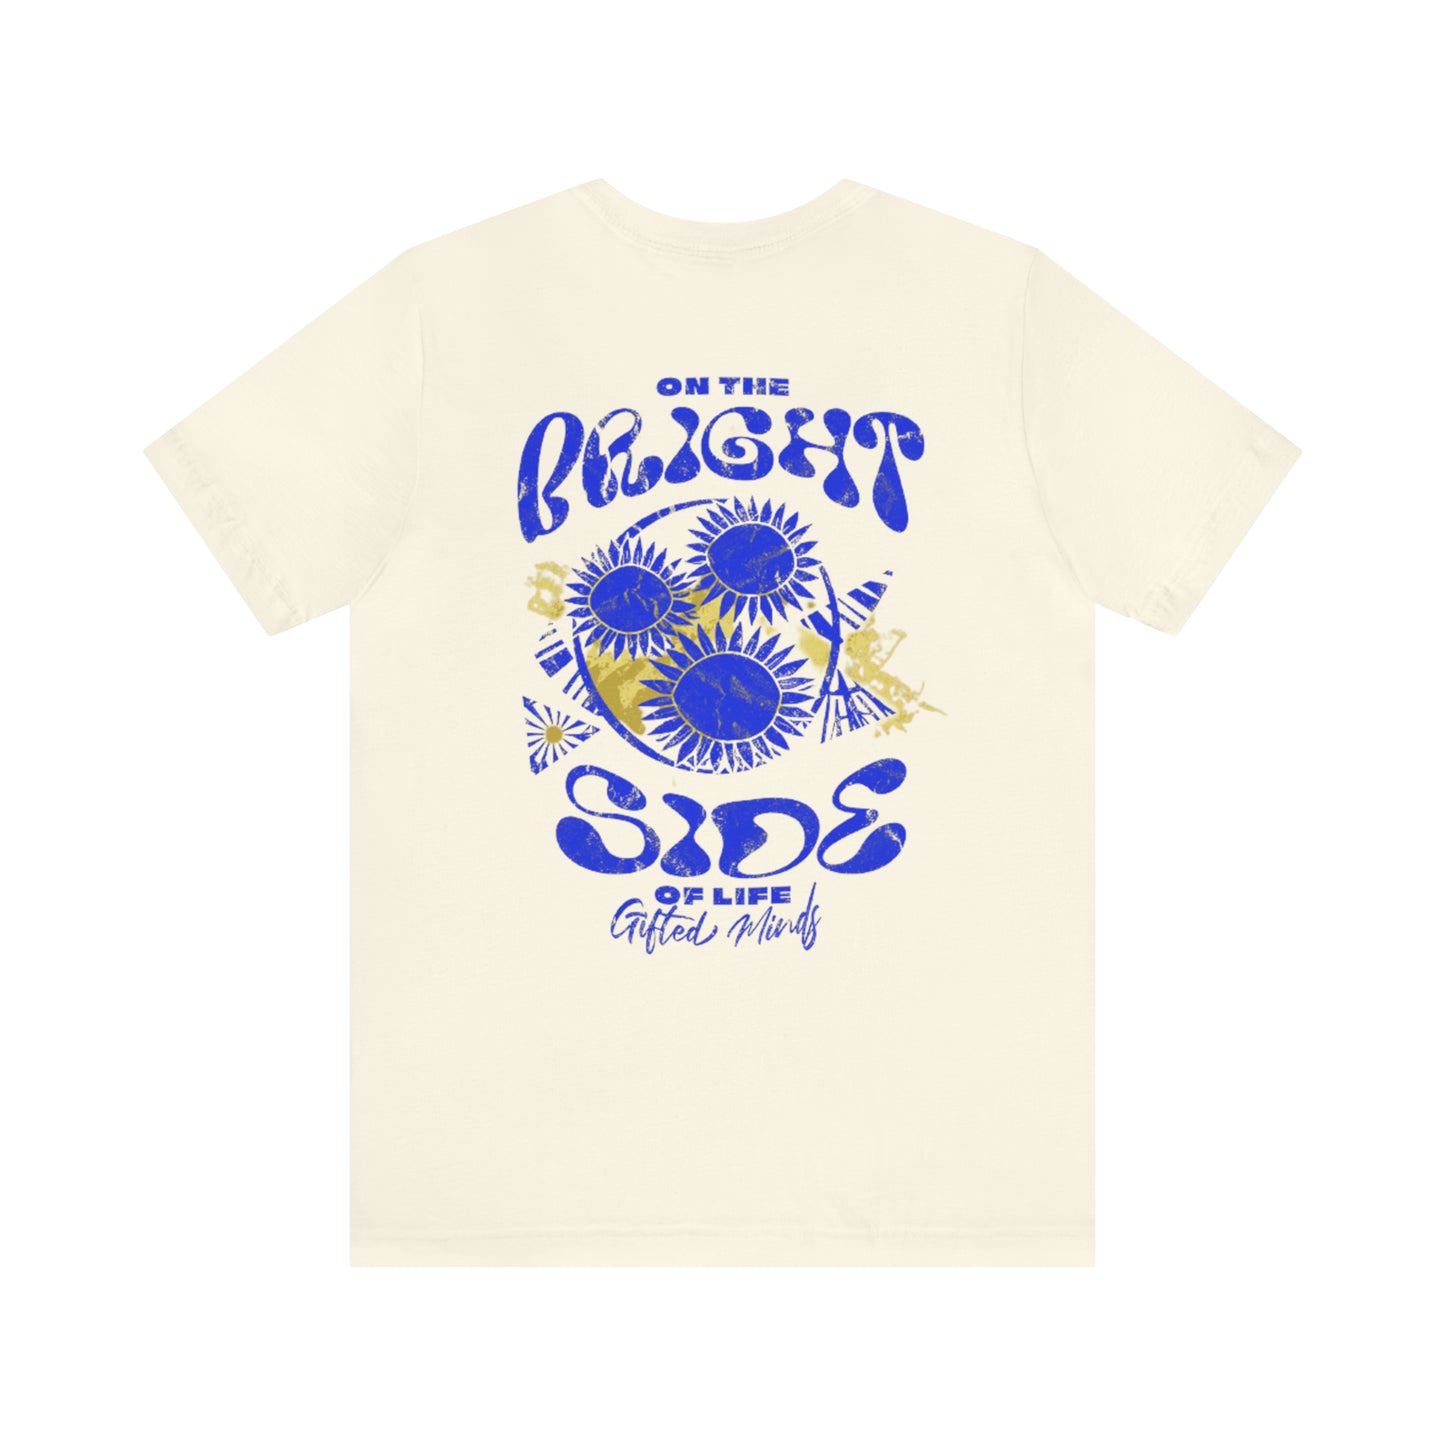 On the Bright Side Short Sleeve Tee - GFTD MNDS